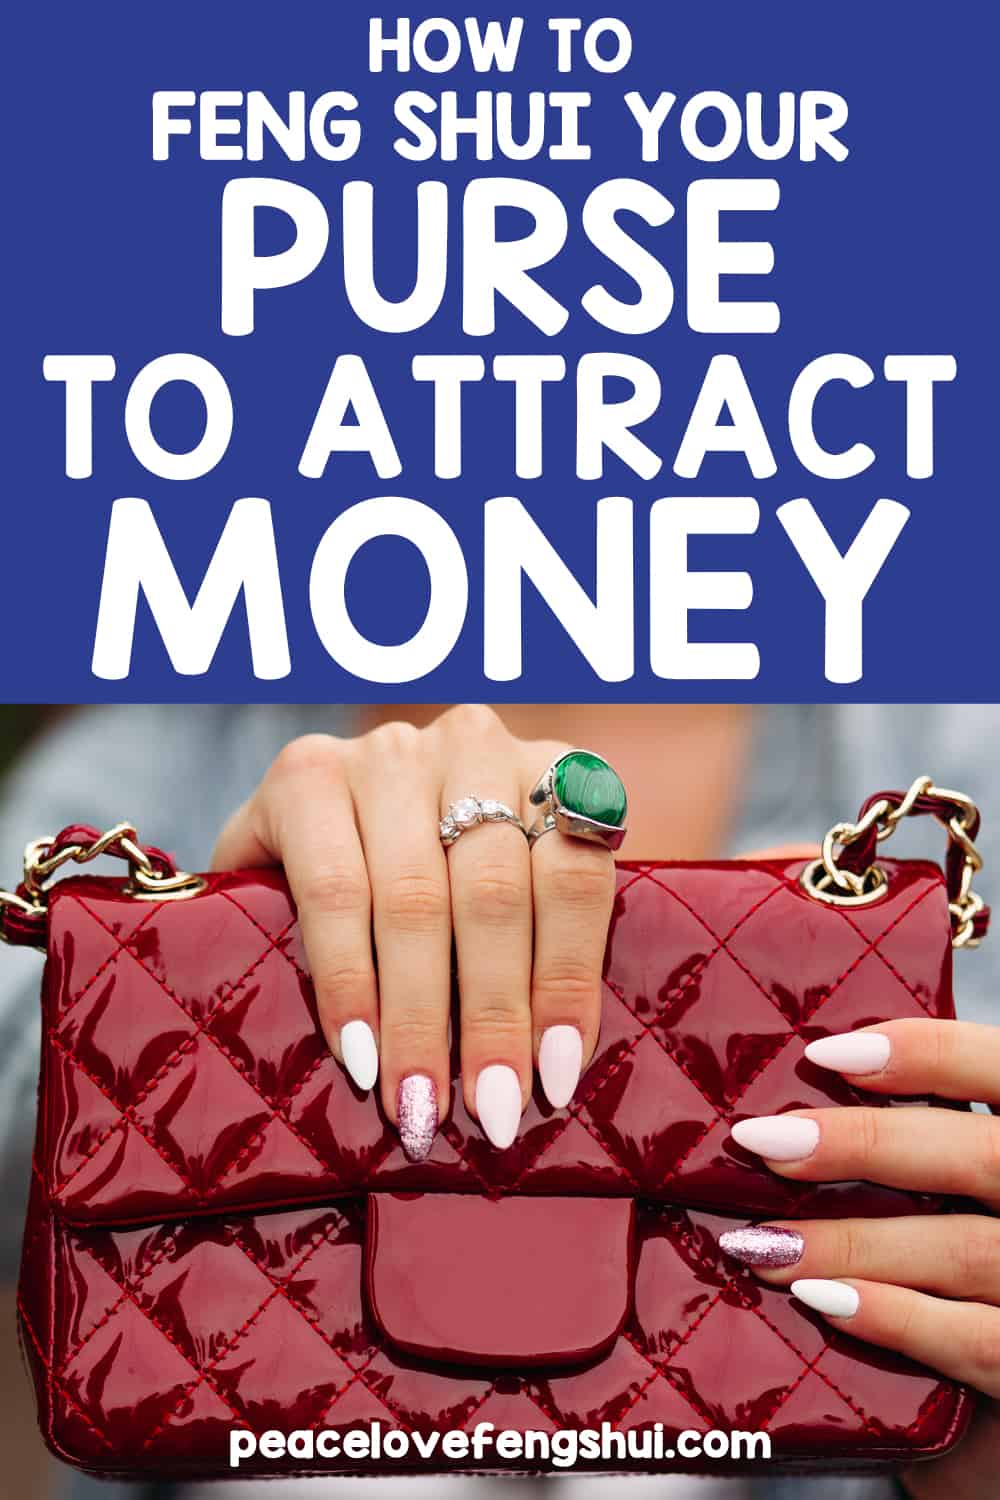 how to feng shui your purse to attract money (woman holding red handbag)